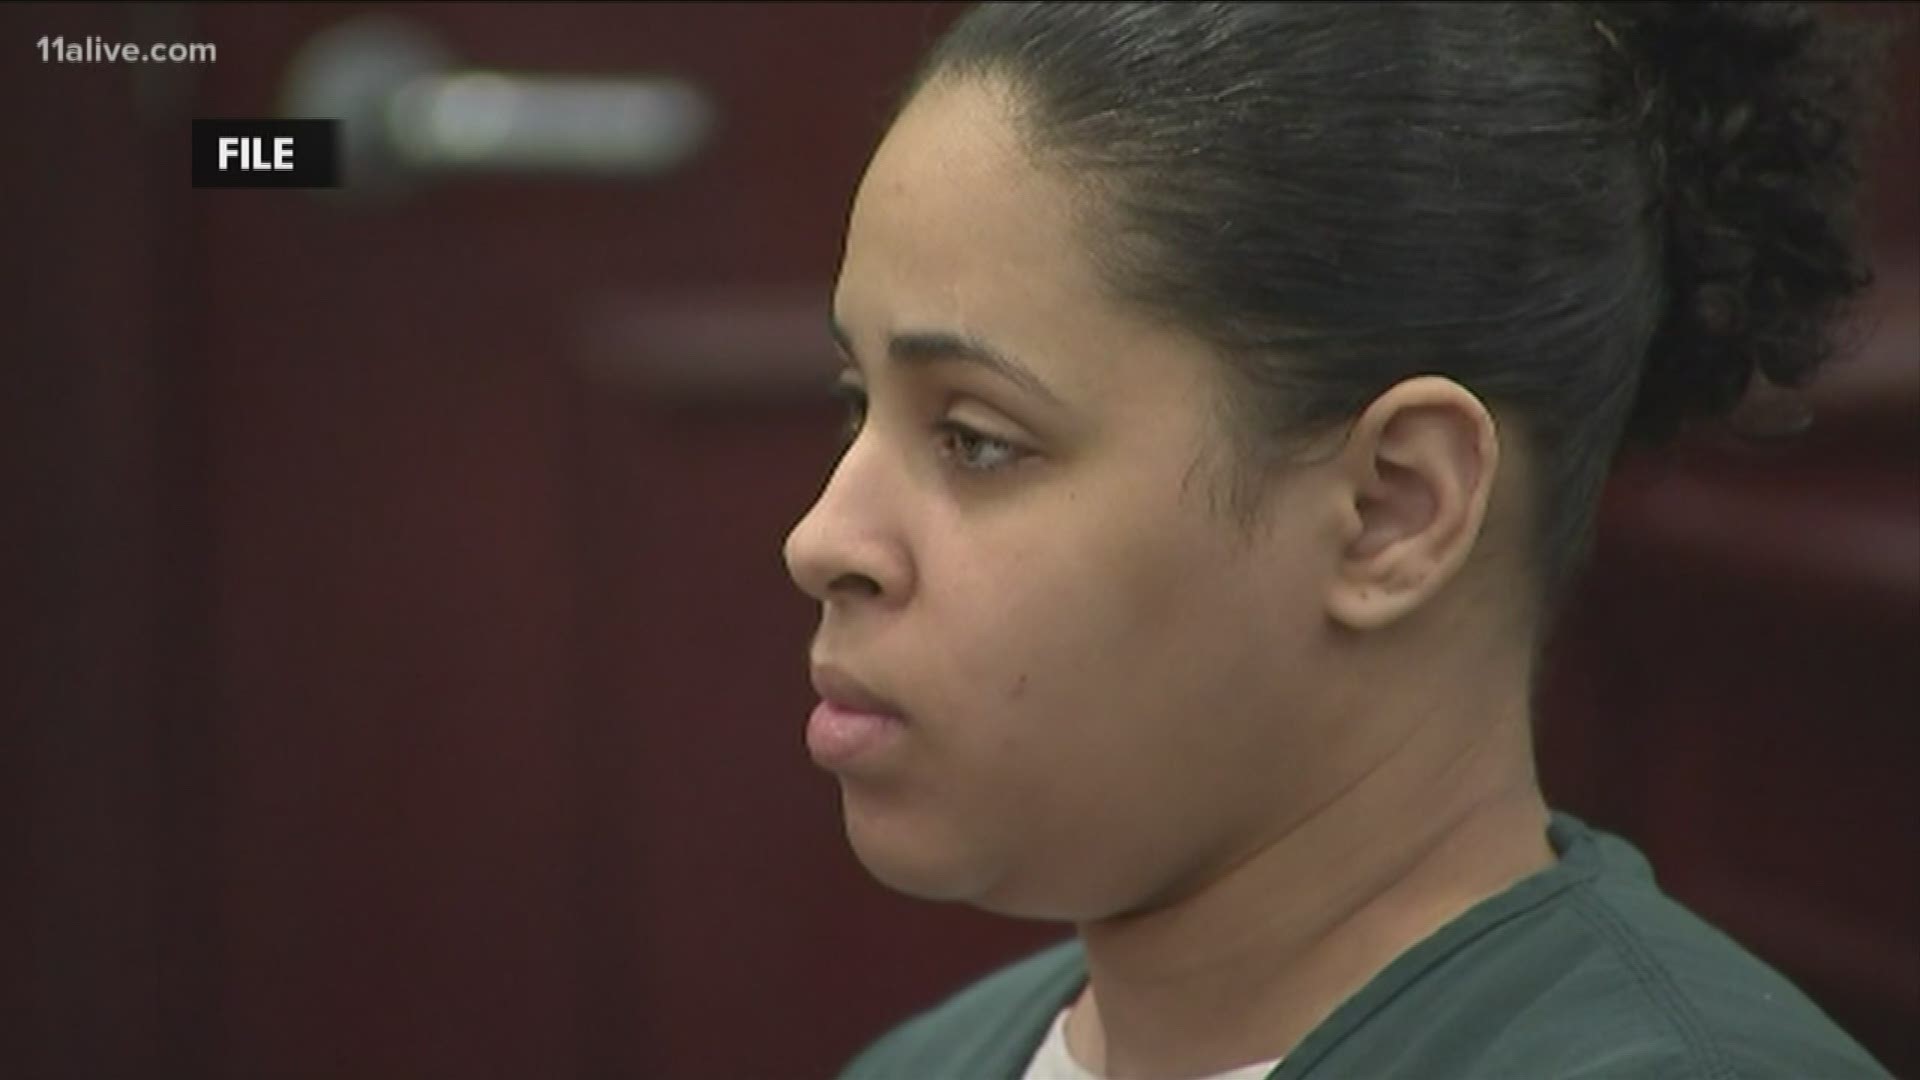 The Clayton County woman was sentenced to 125 years in jail for killing her baby's father.